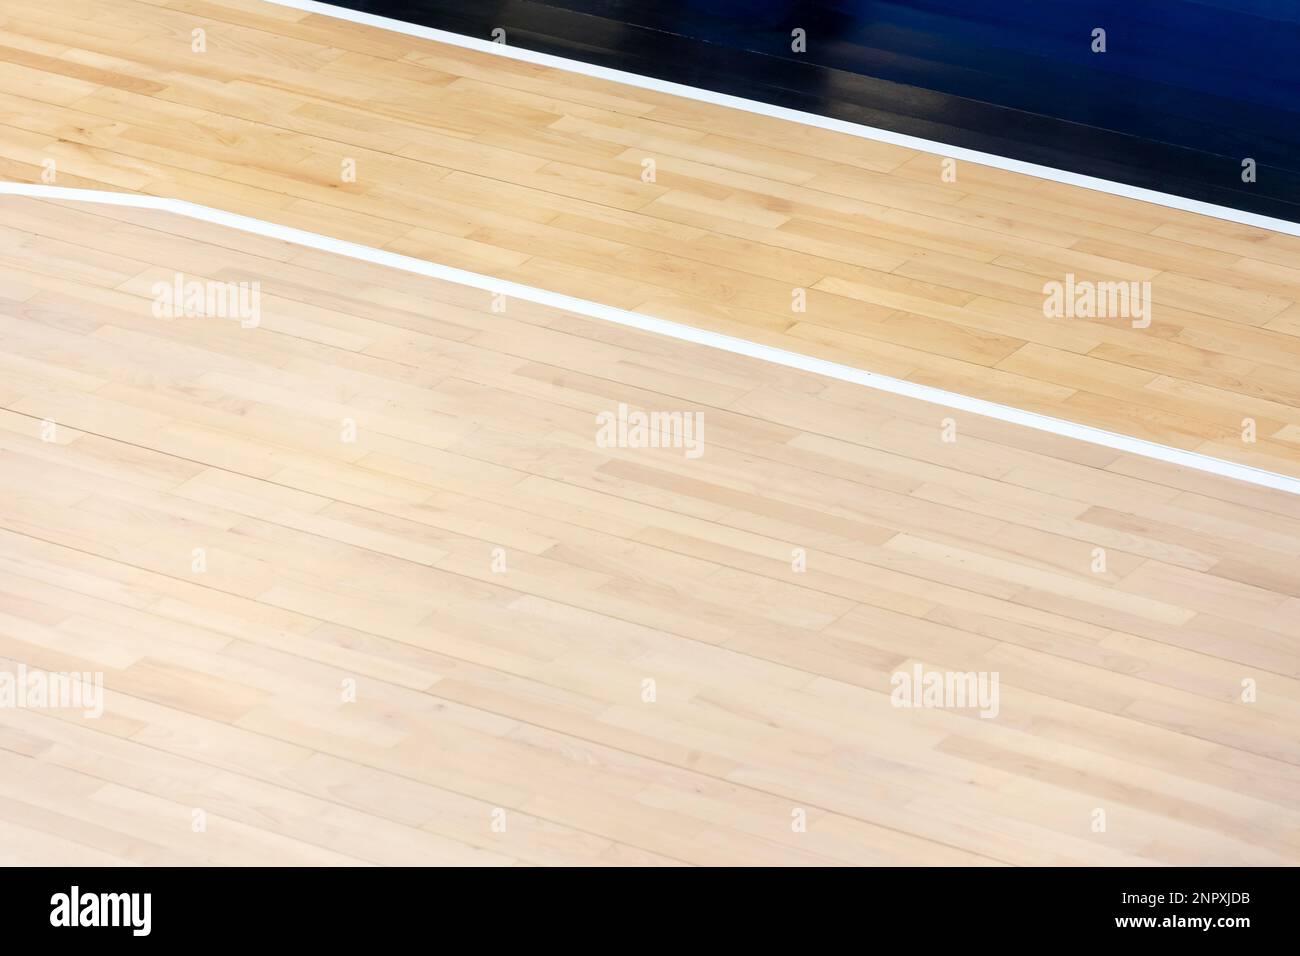 Wooden floor volleyball, basketball, badminton, futsal, handball court with light effect. Wooden floor of sports hall with marking lines line on woode Stock Photo